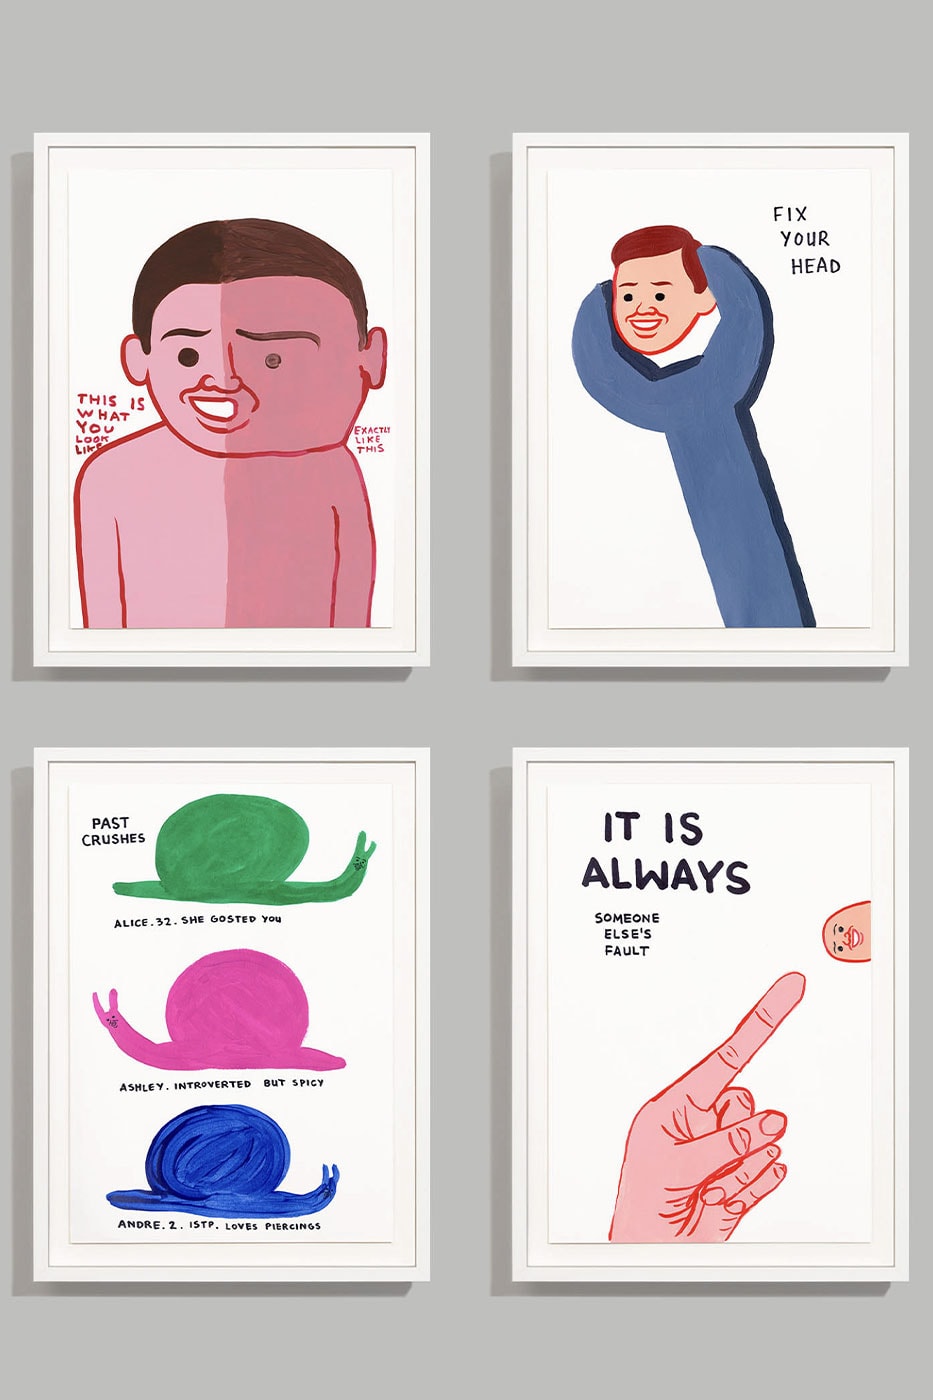 Dark Humor Icons David Shrigley and Joan Cornella Have Unveiled Their Collaborative Project 'VOTE' contemporary art allrightsreserved spanish cartoonist 